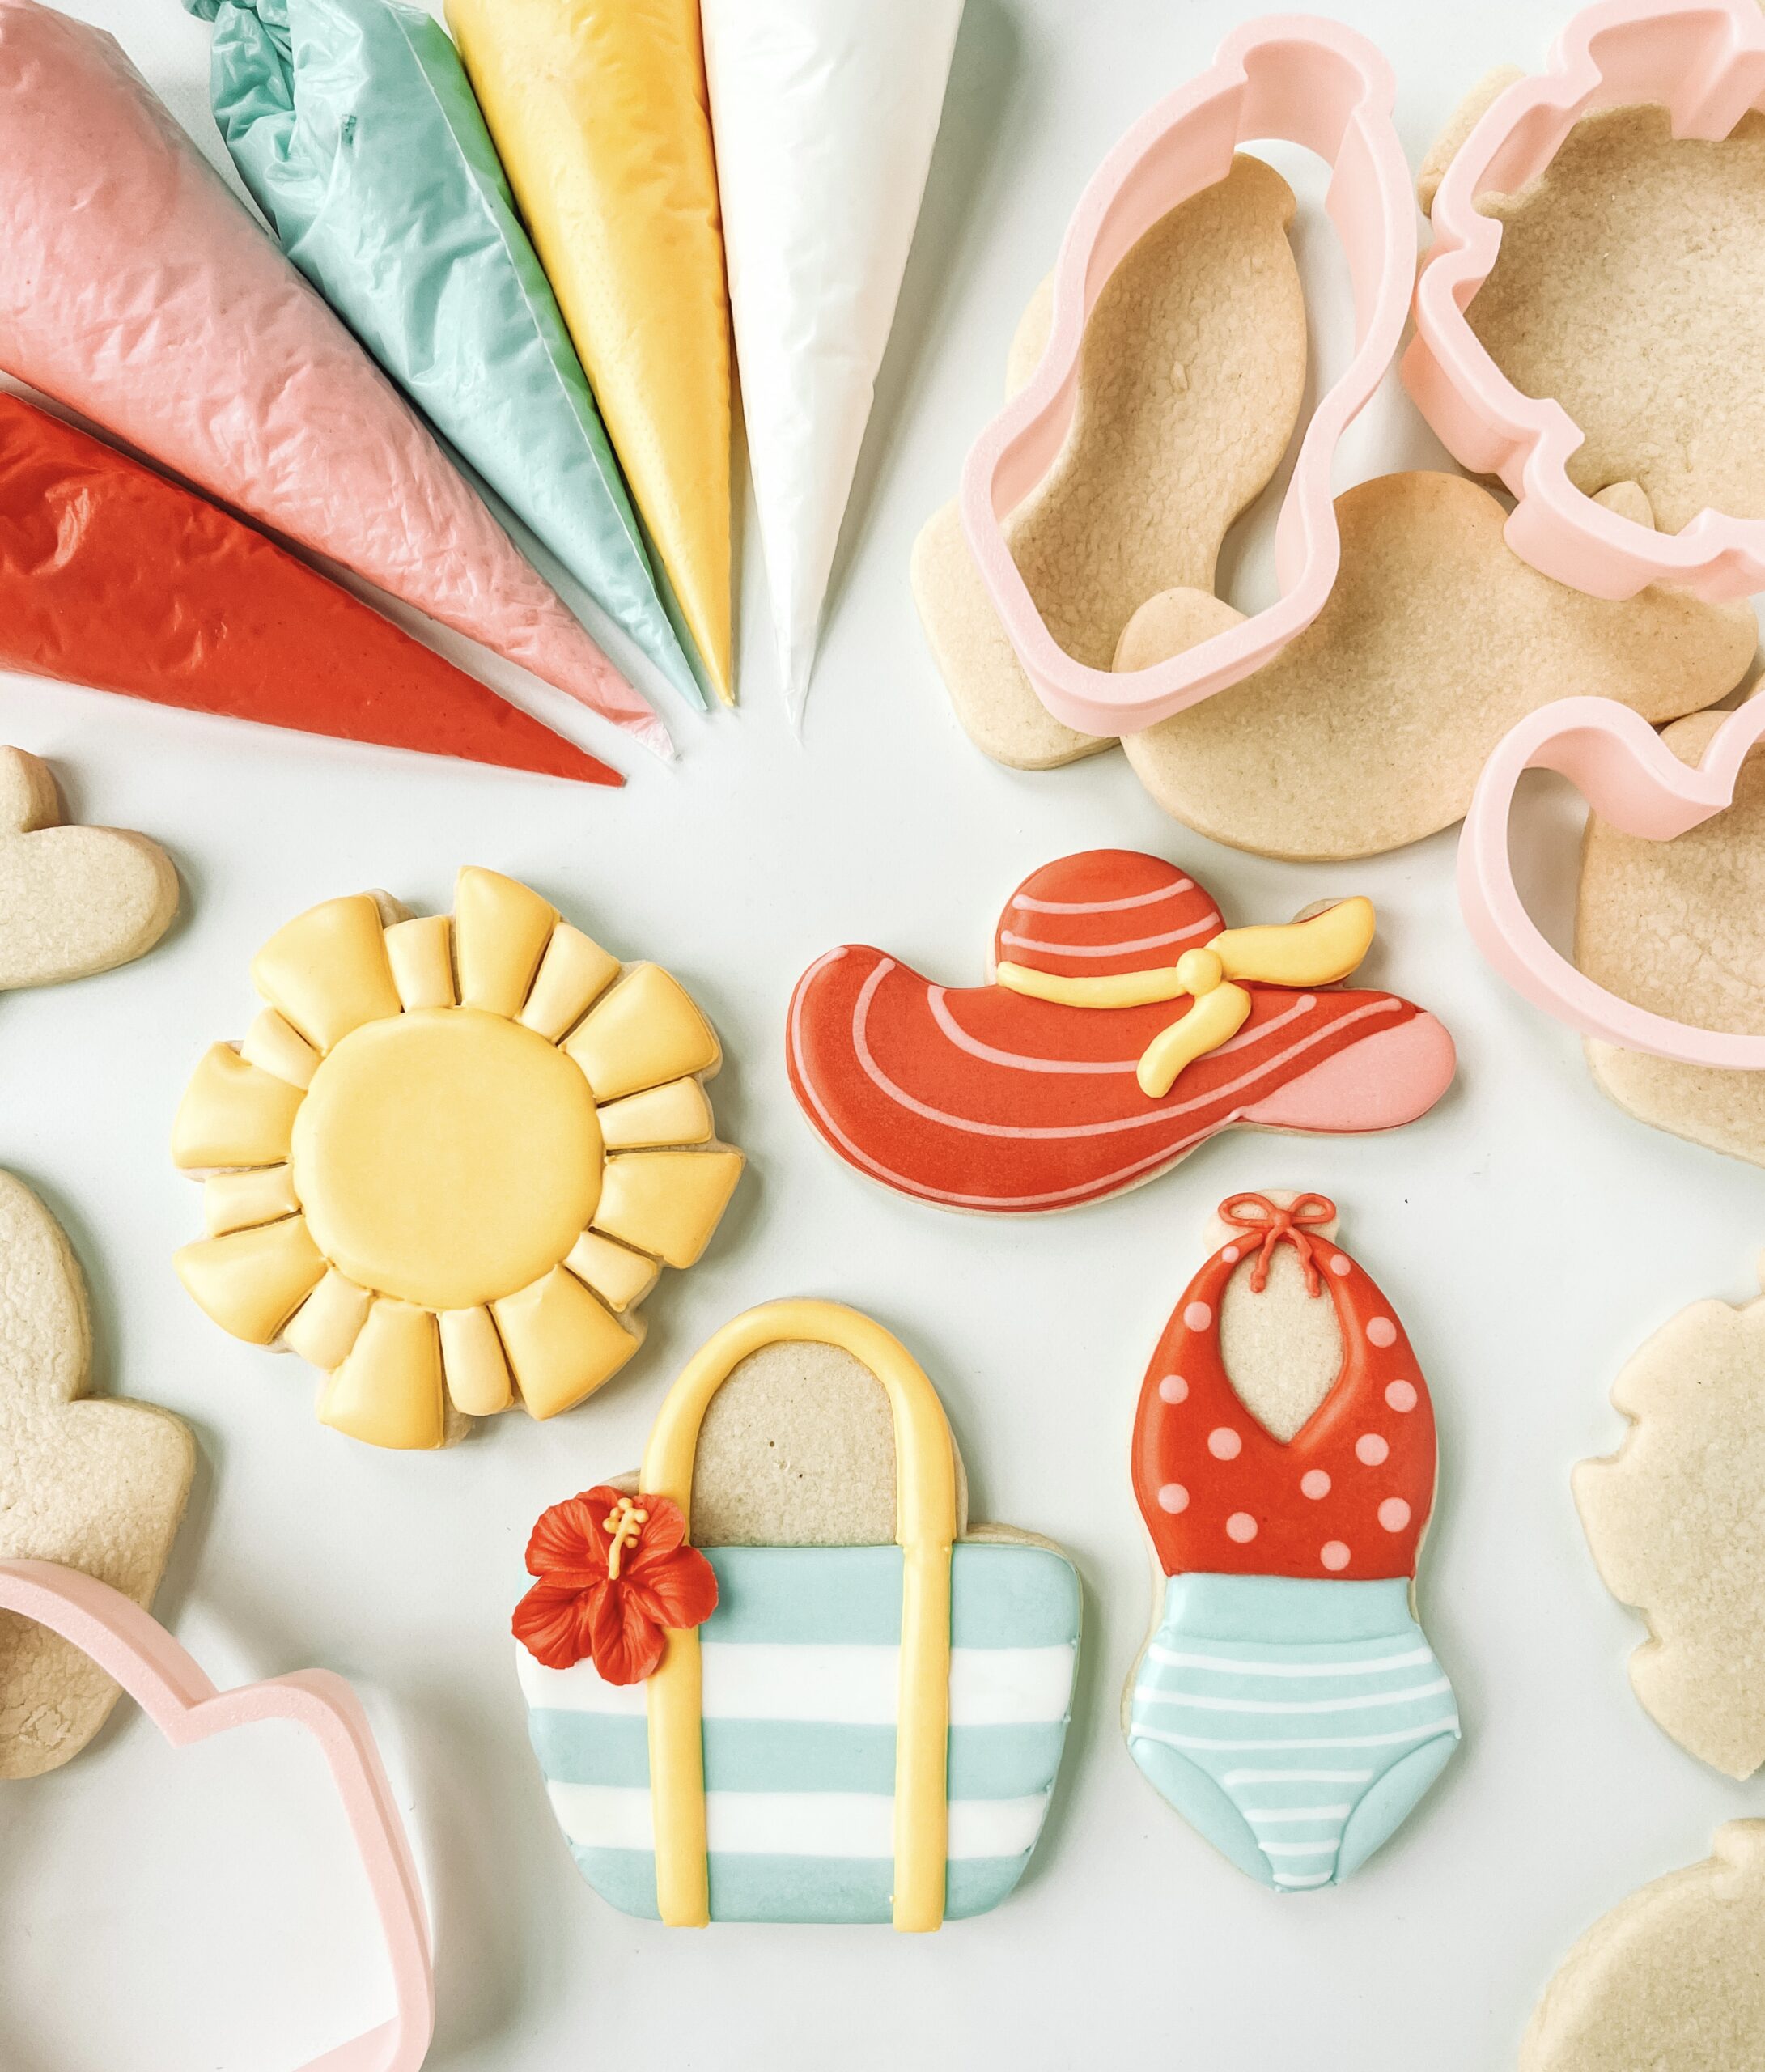 FREE Online Cake Cookie Class - Summer's Sweet Shoppe